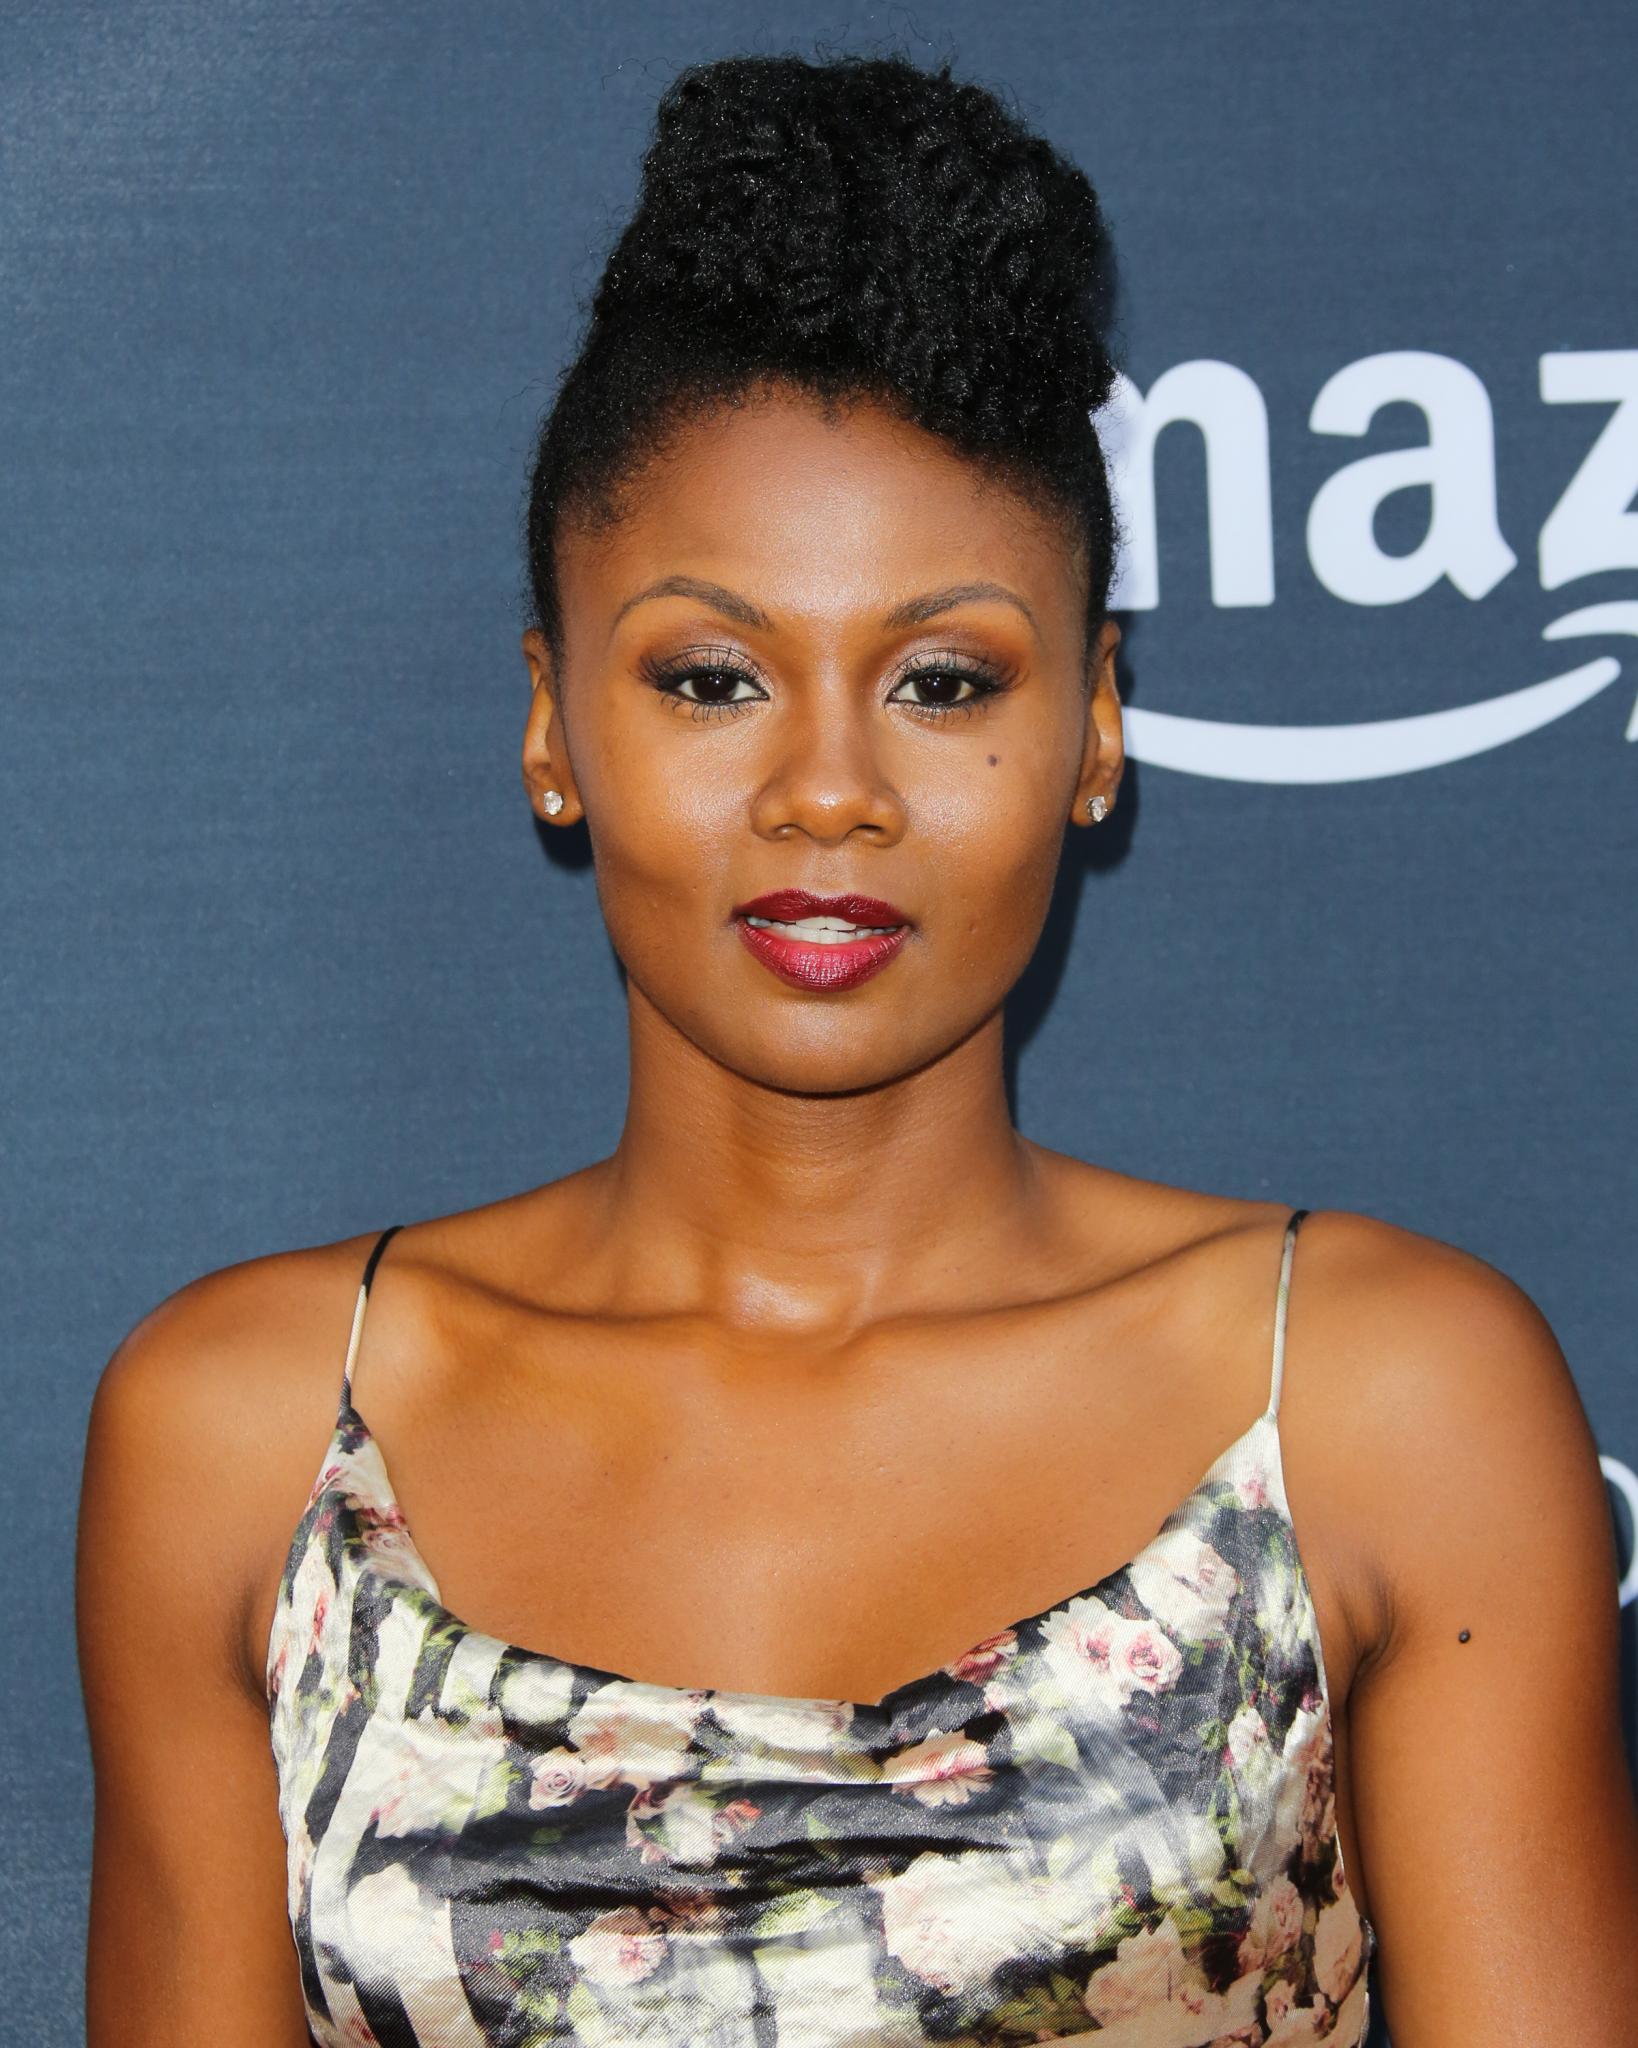 EXCLUSIVE: Emayatzy Corinealdi Discusses New Role in ‘Hand of God,’ Finding Love in Hollywood